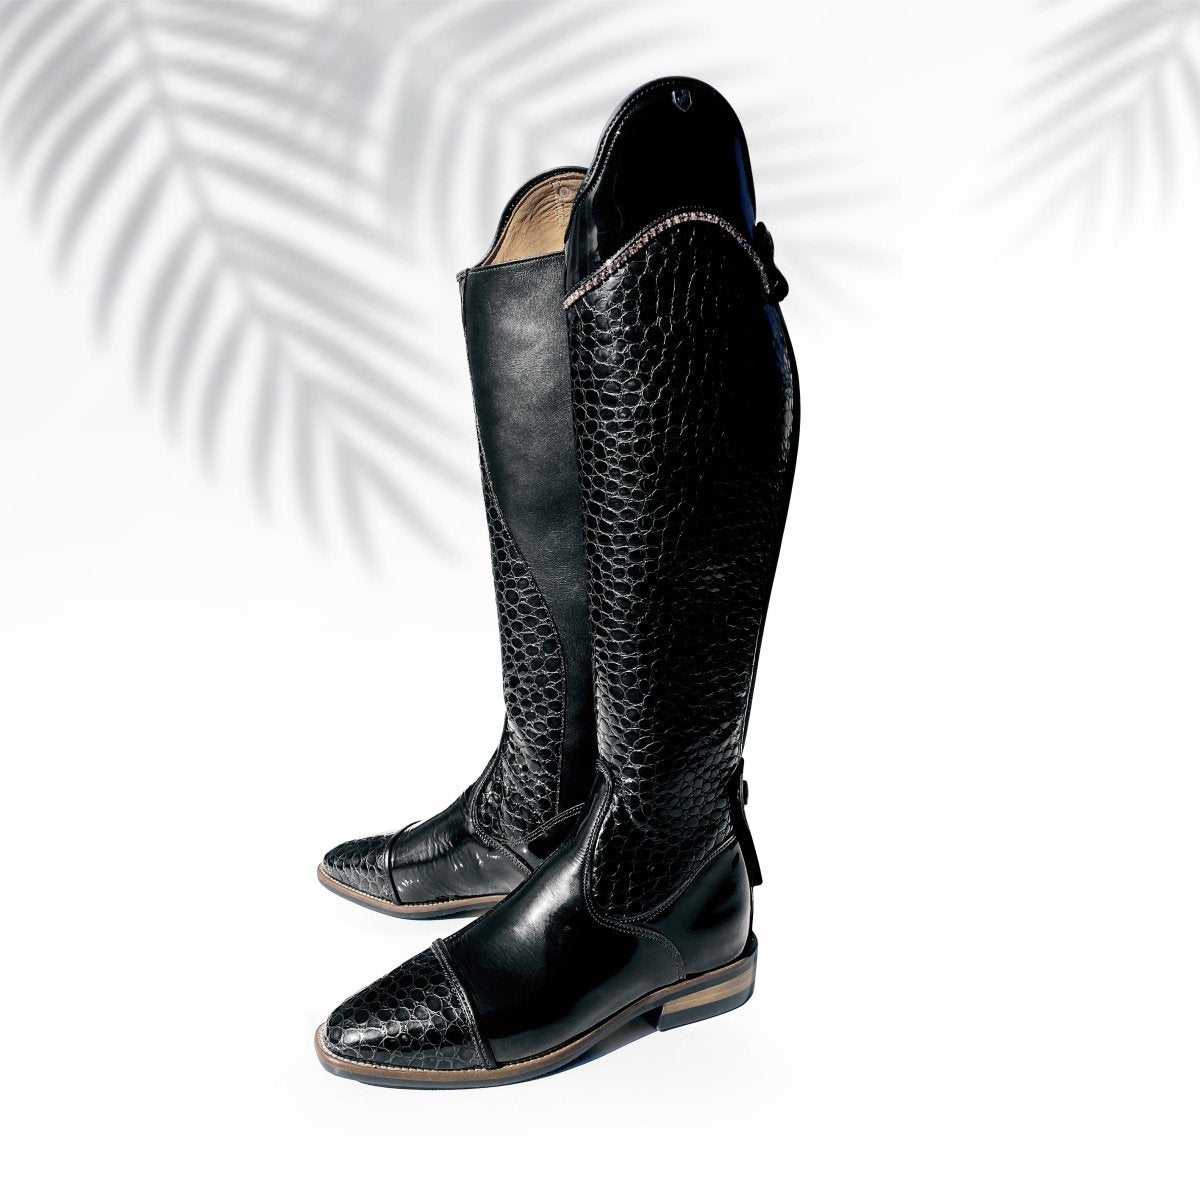 Classic tall dressage boot with rose-gold Swarovski accent rose gold zipper in shiny patent croco-leat